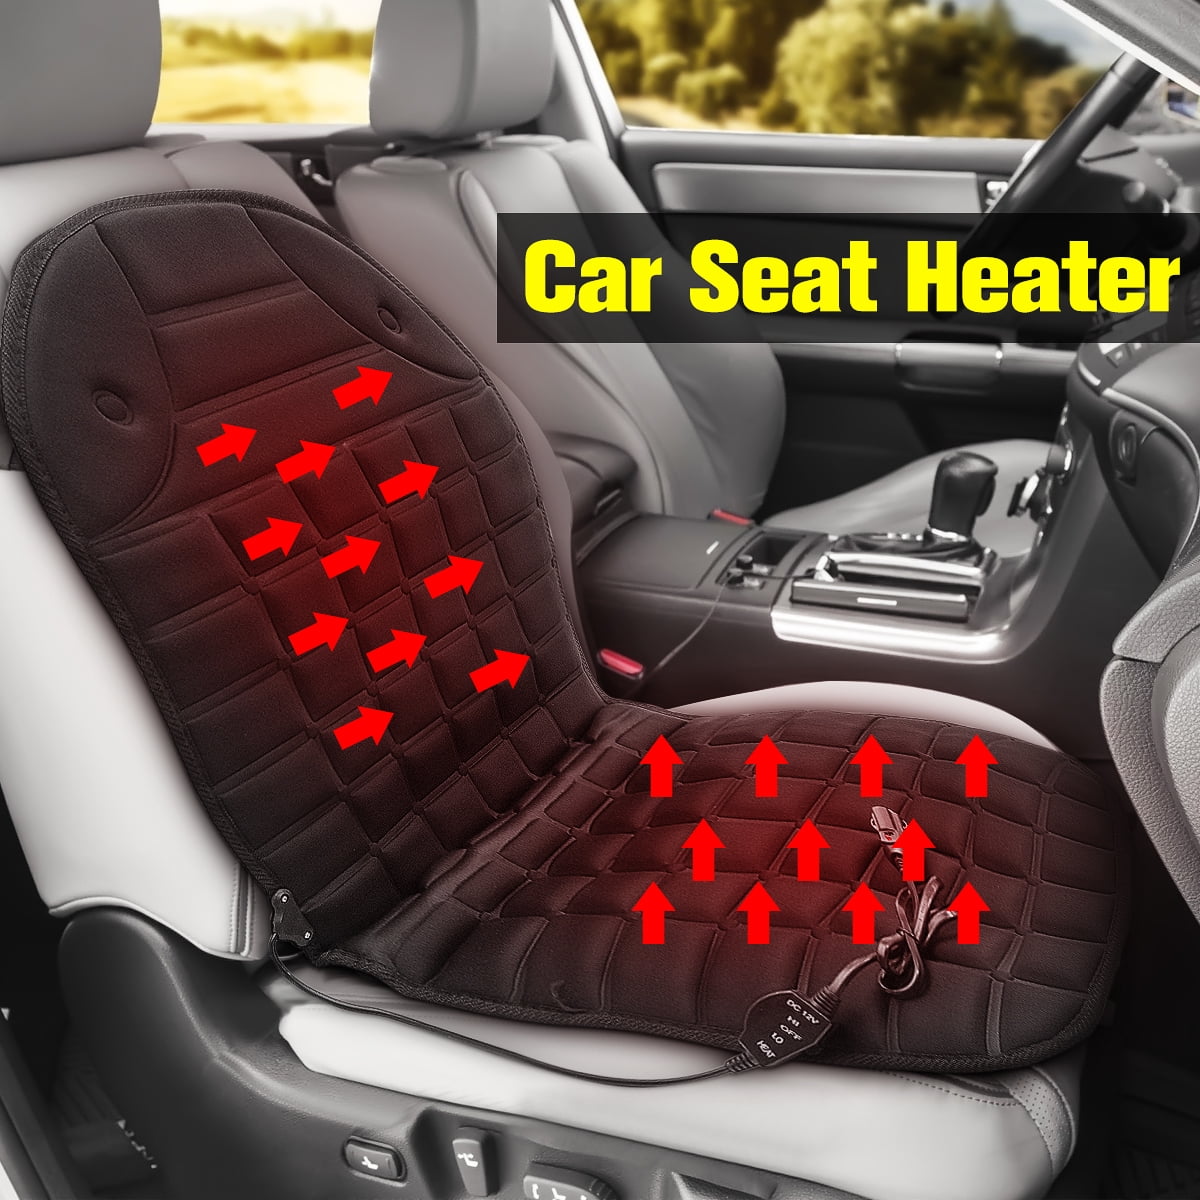 Seat Warmer For Cars - Cars